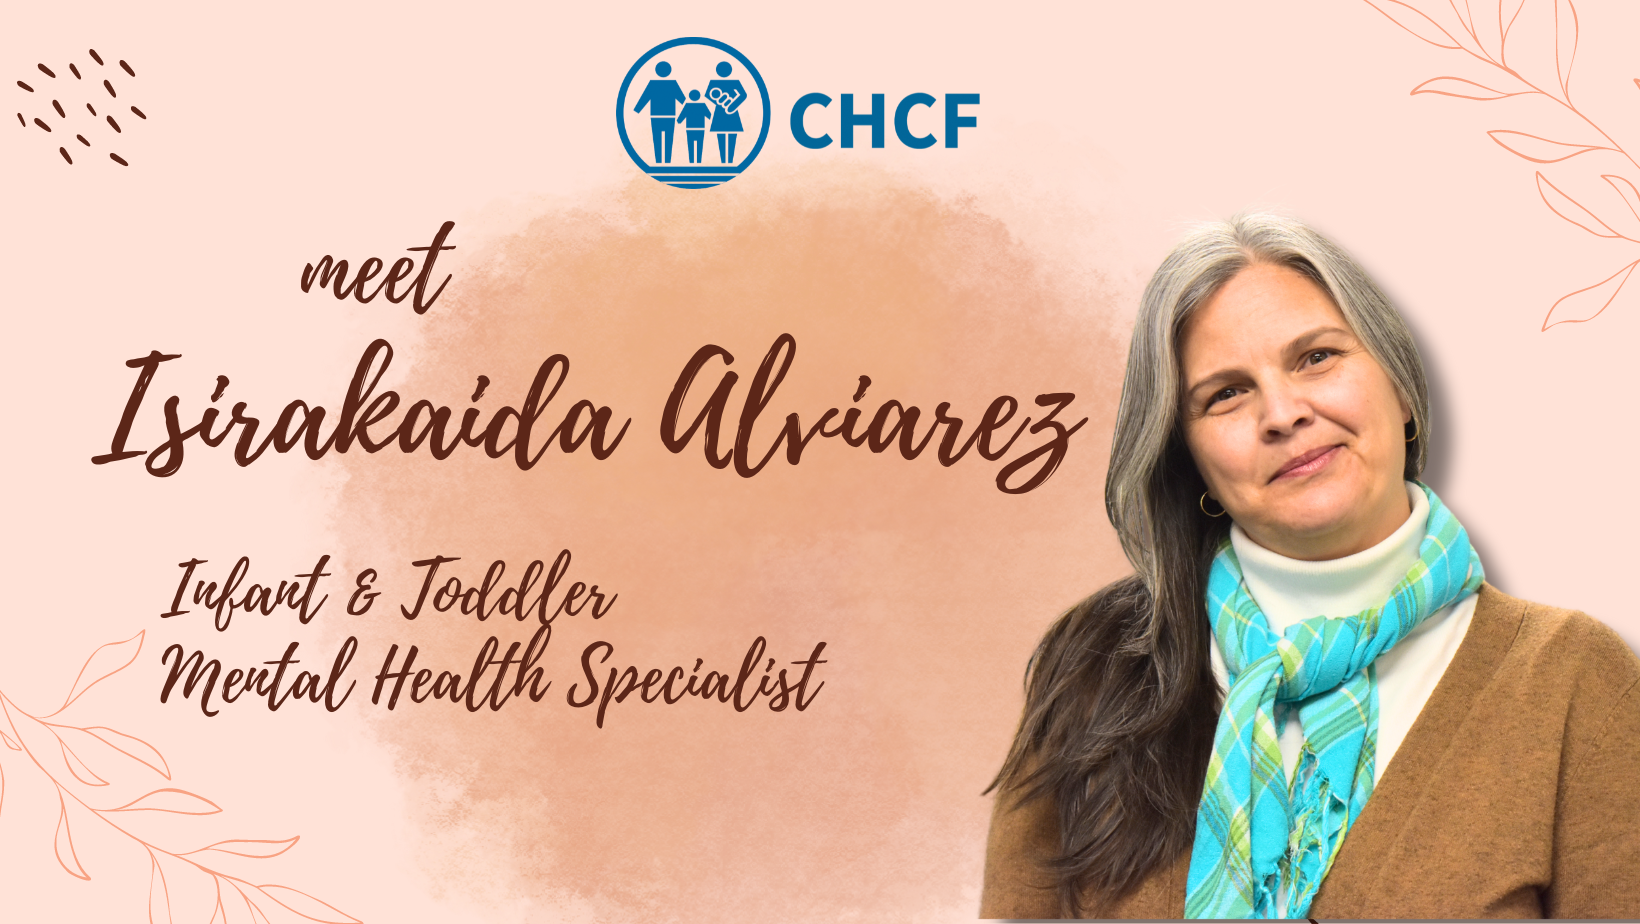 Need support? Meet Isirakaida Alviarez, one of our Infant & Toddler Mental Health Specialists